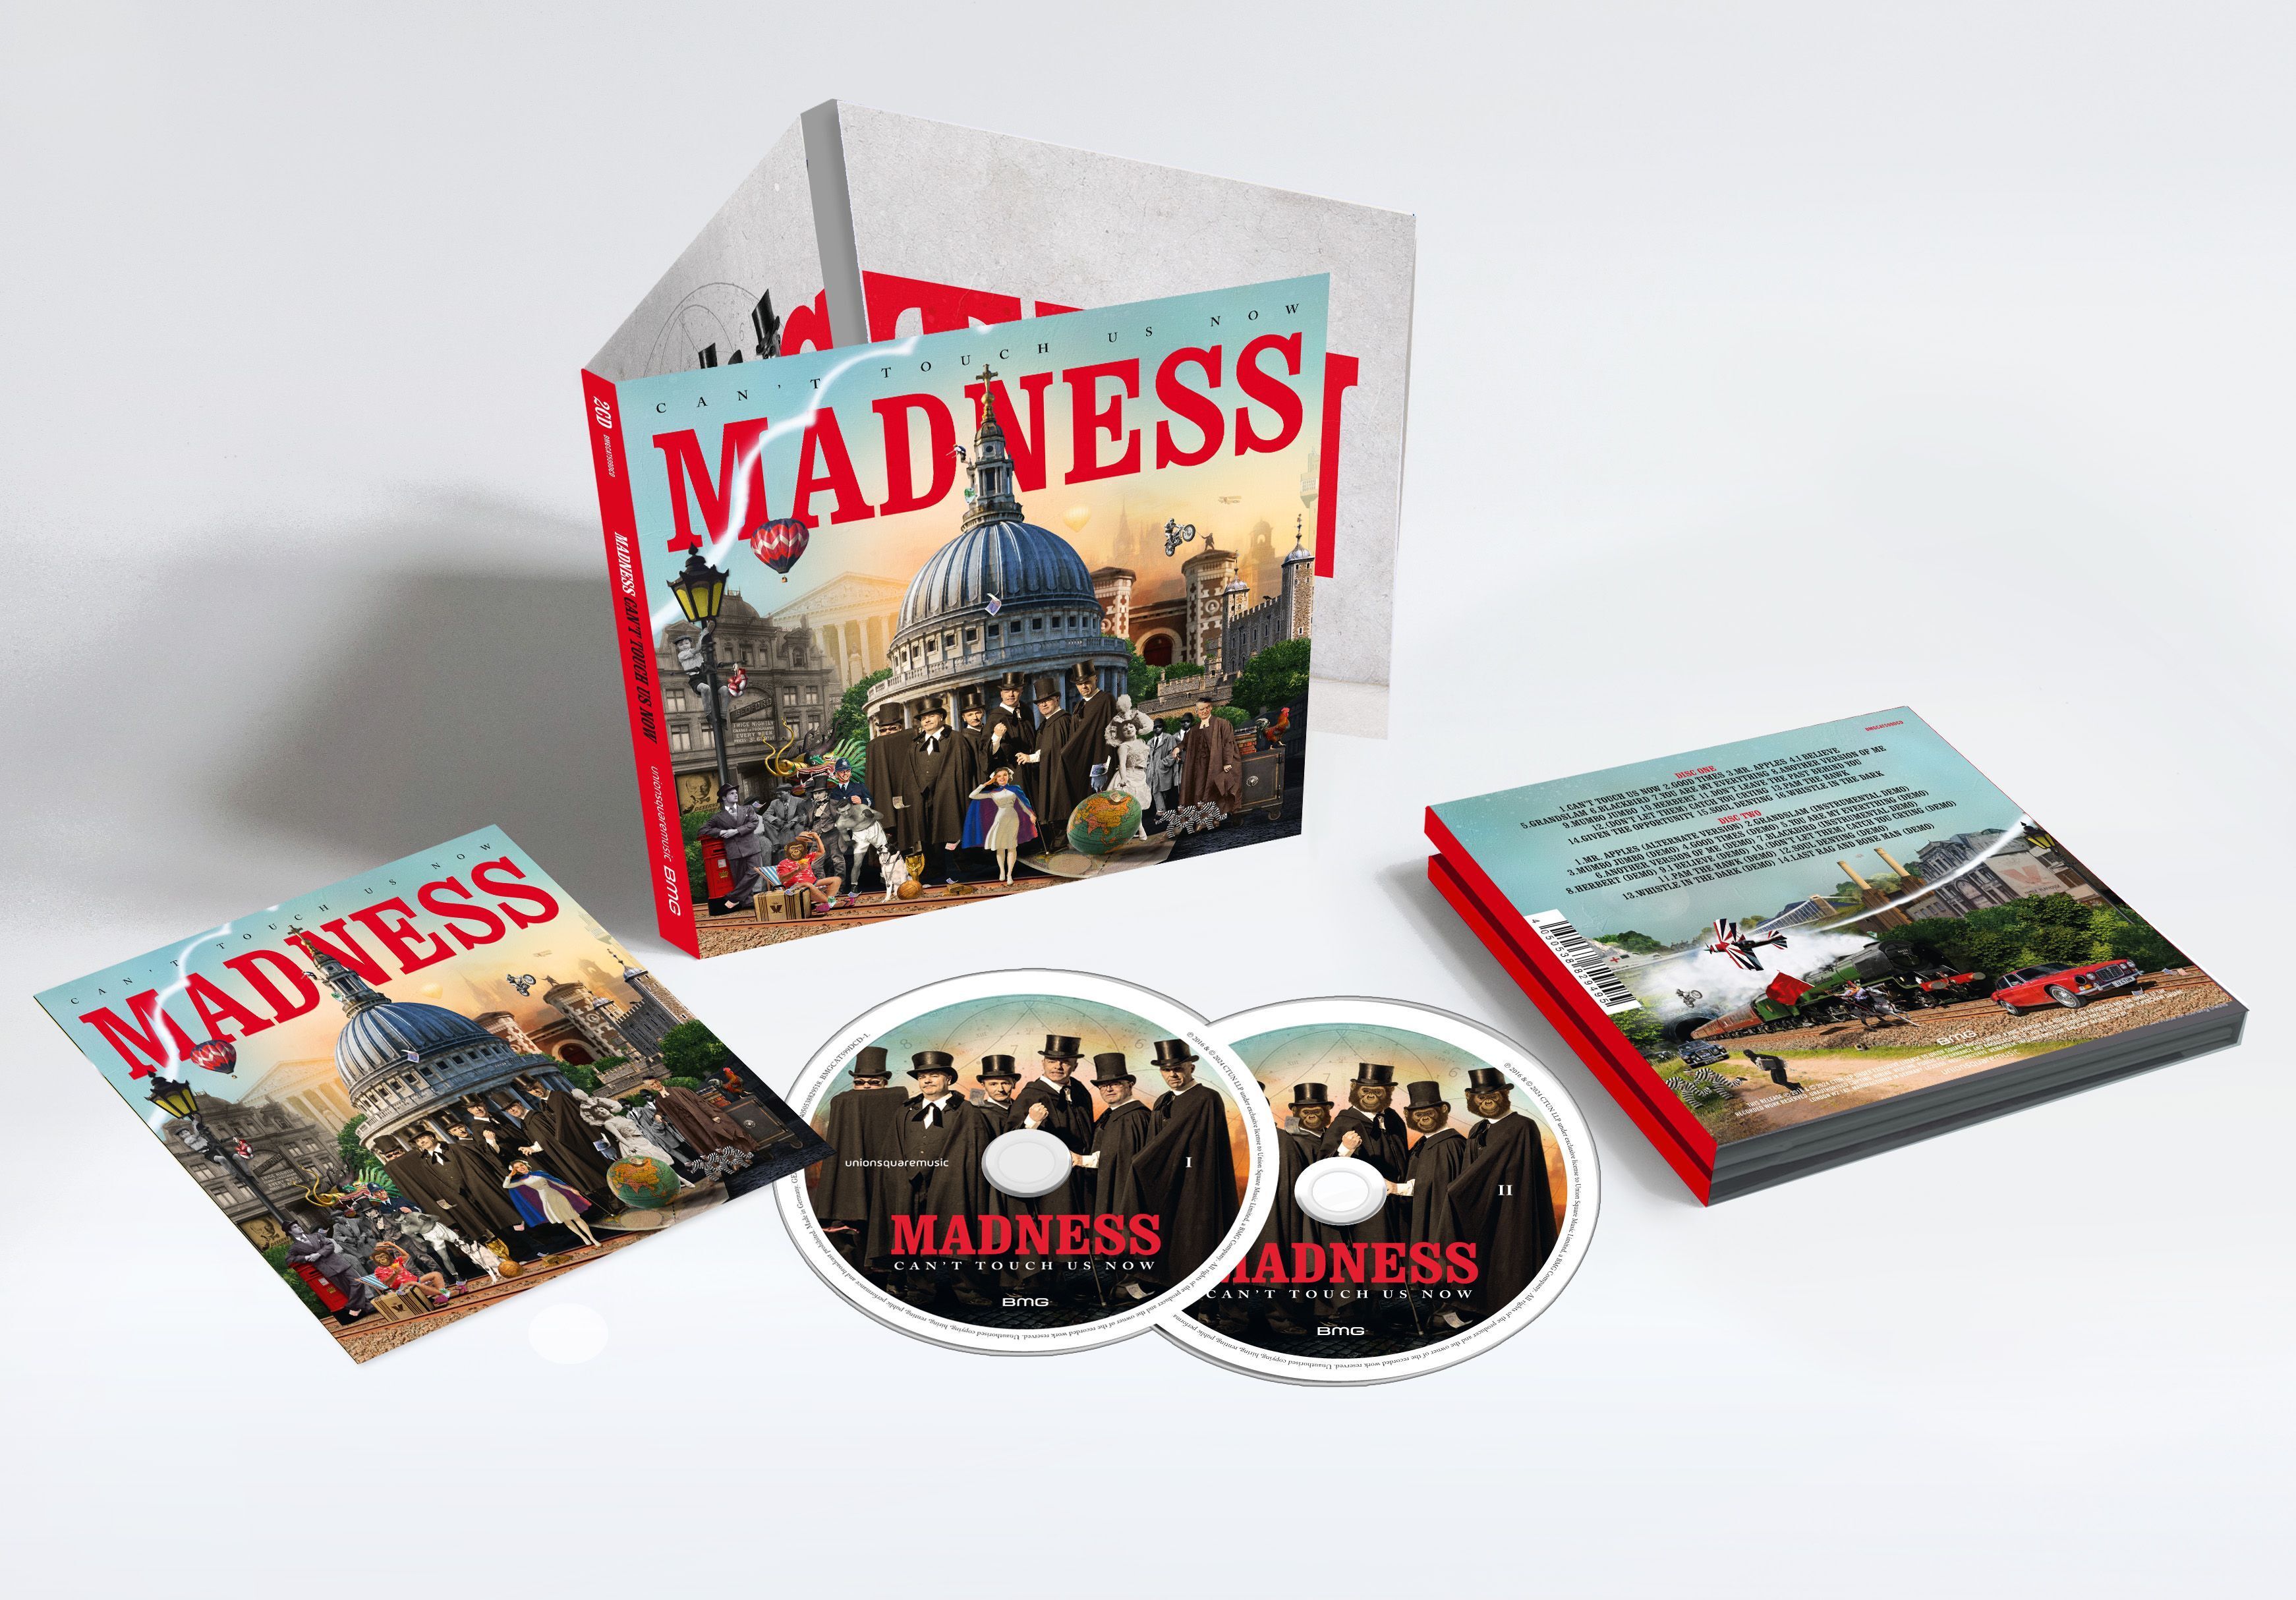 Madness Can't Touch Us Now (CD) Expanded  Album - Photo 1/1